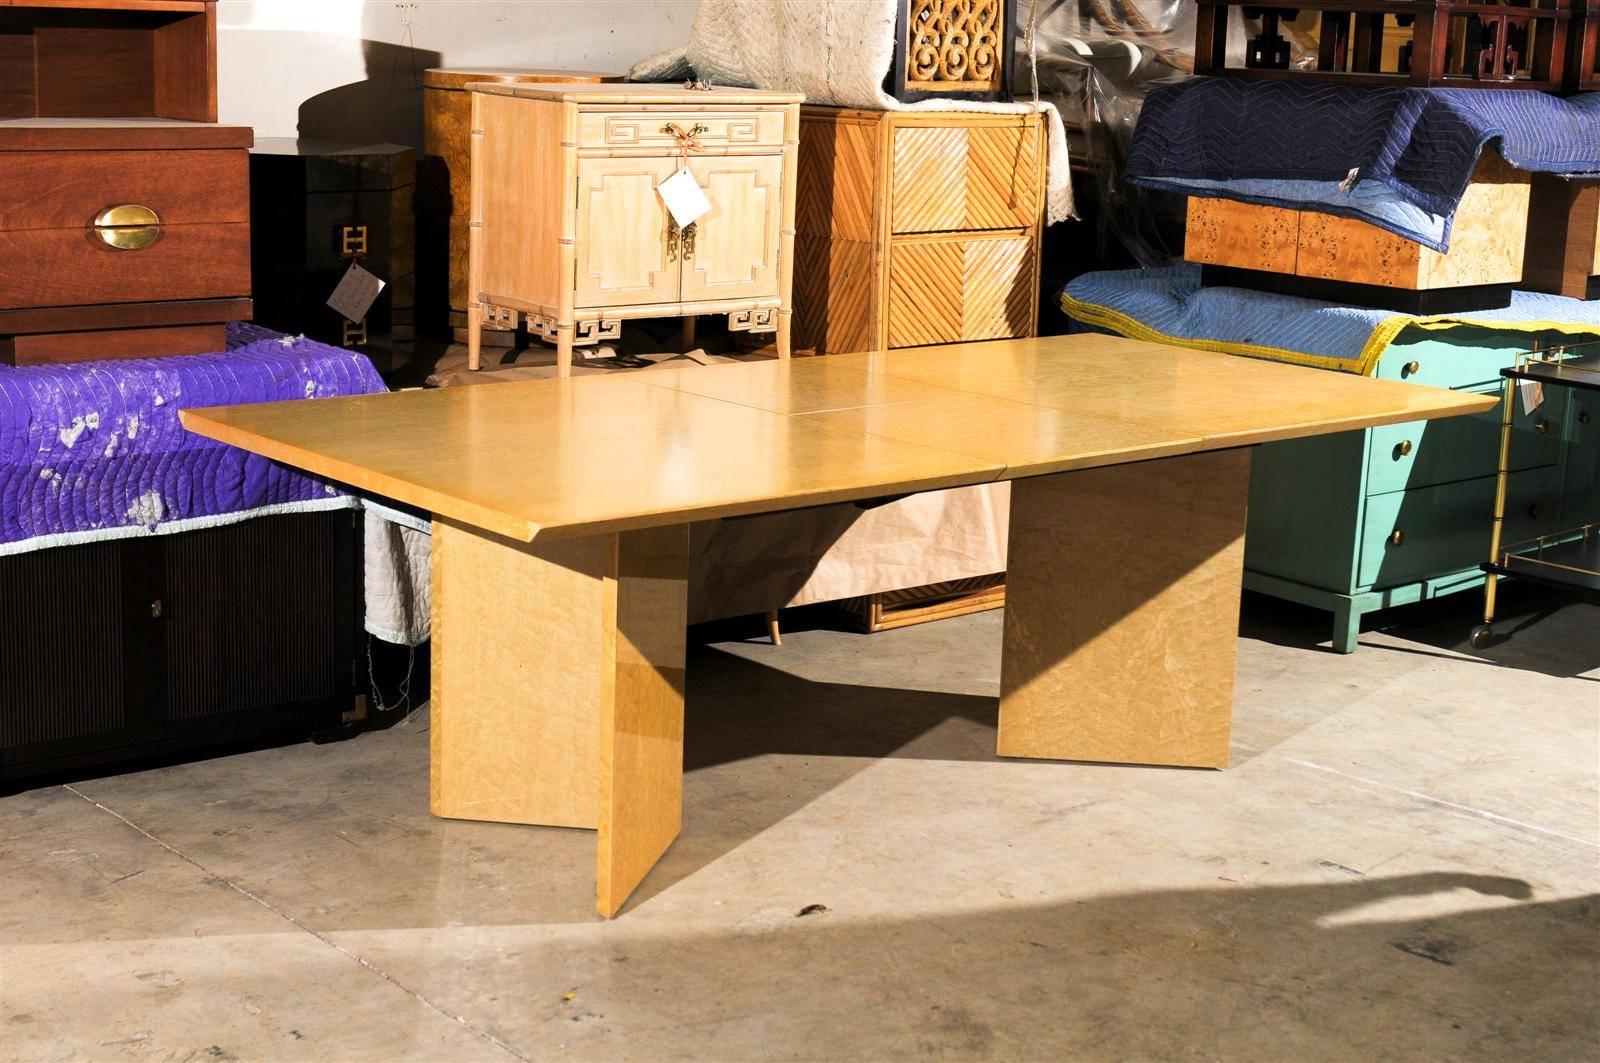 This magnificent dining table is shipped as professionally photographed and described in the listing narrative: Meticulously professionally restored and installation ready.

A fabulous Modern knife edge extension dining or conference table, circa